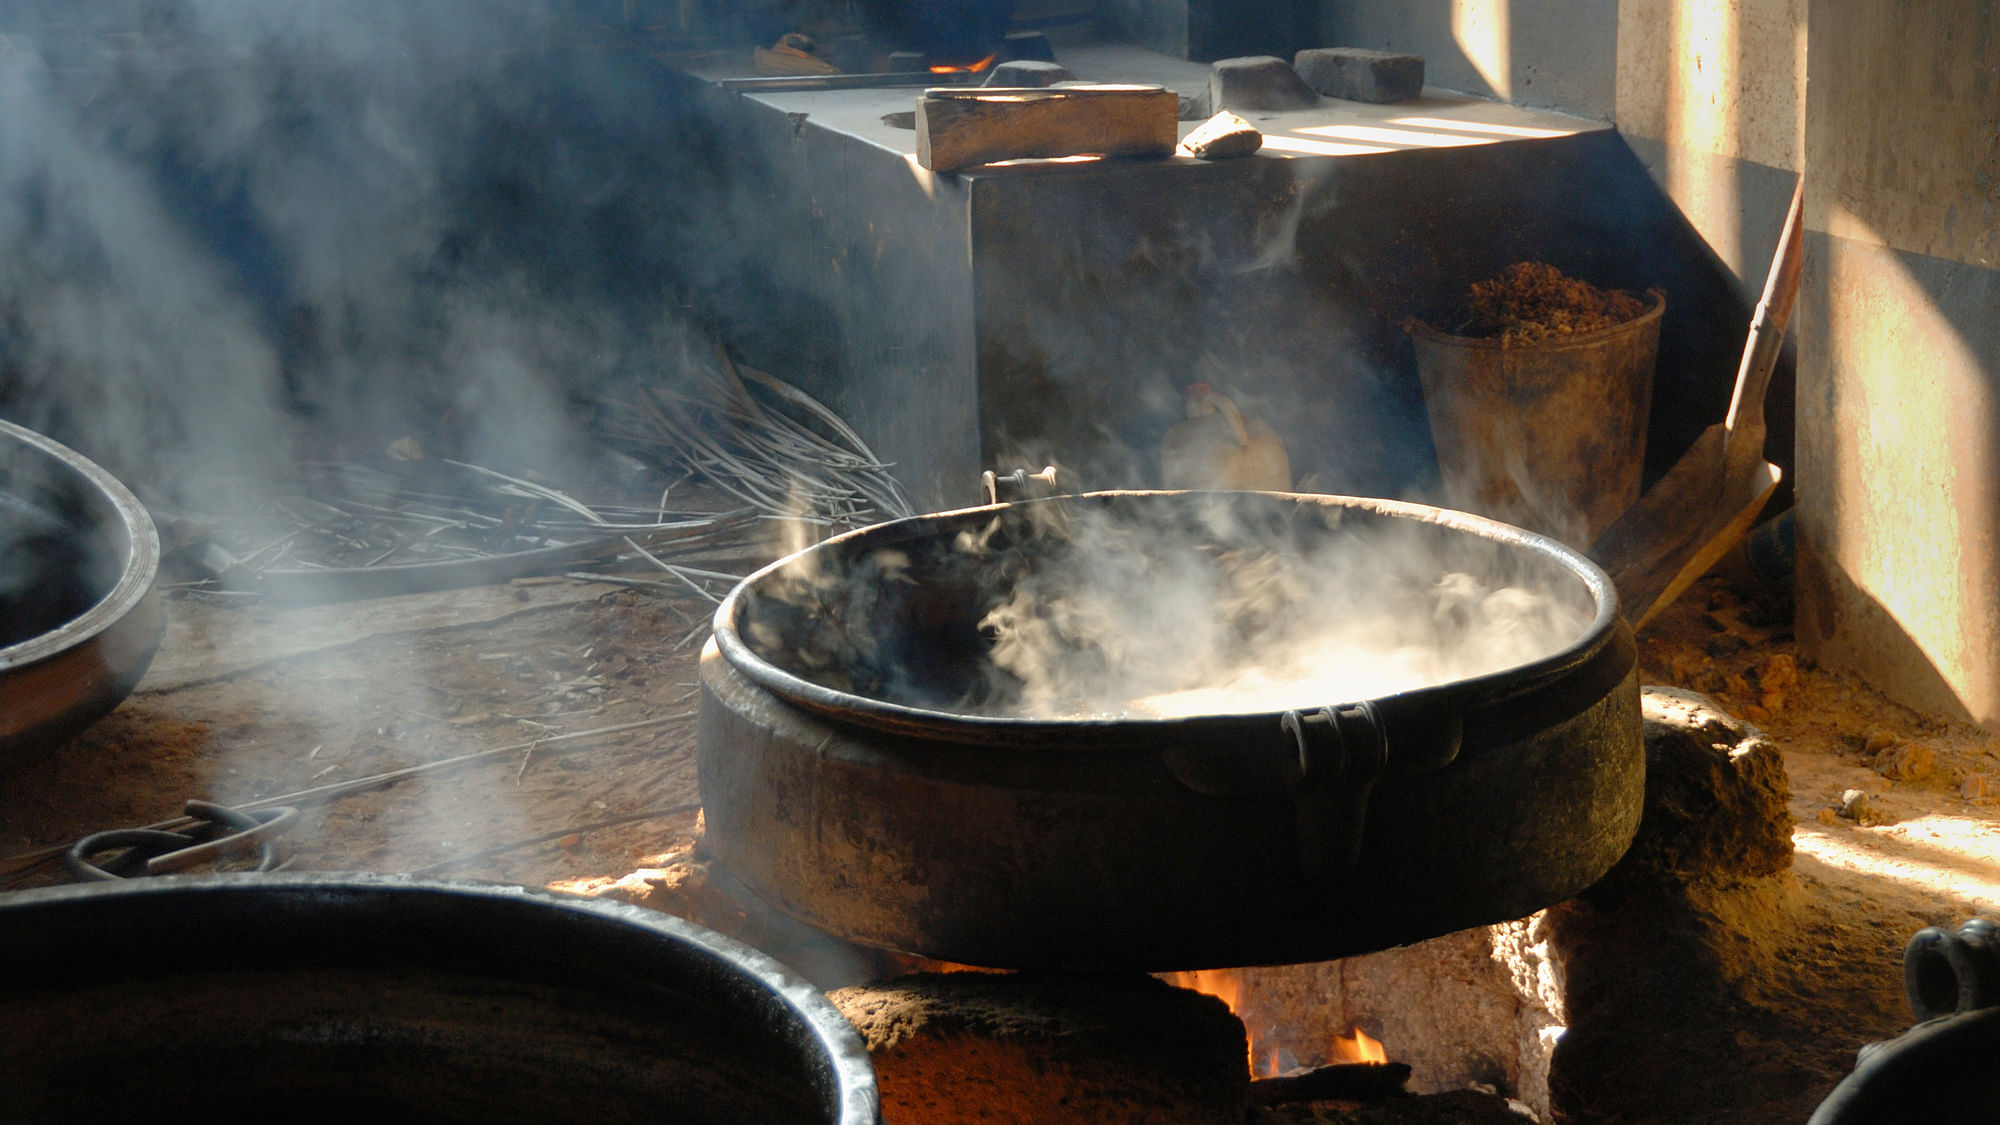 Fumes from cooking fires trigger millions of deaths annually. (Photo: iStock)